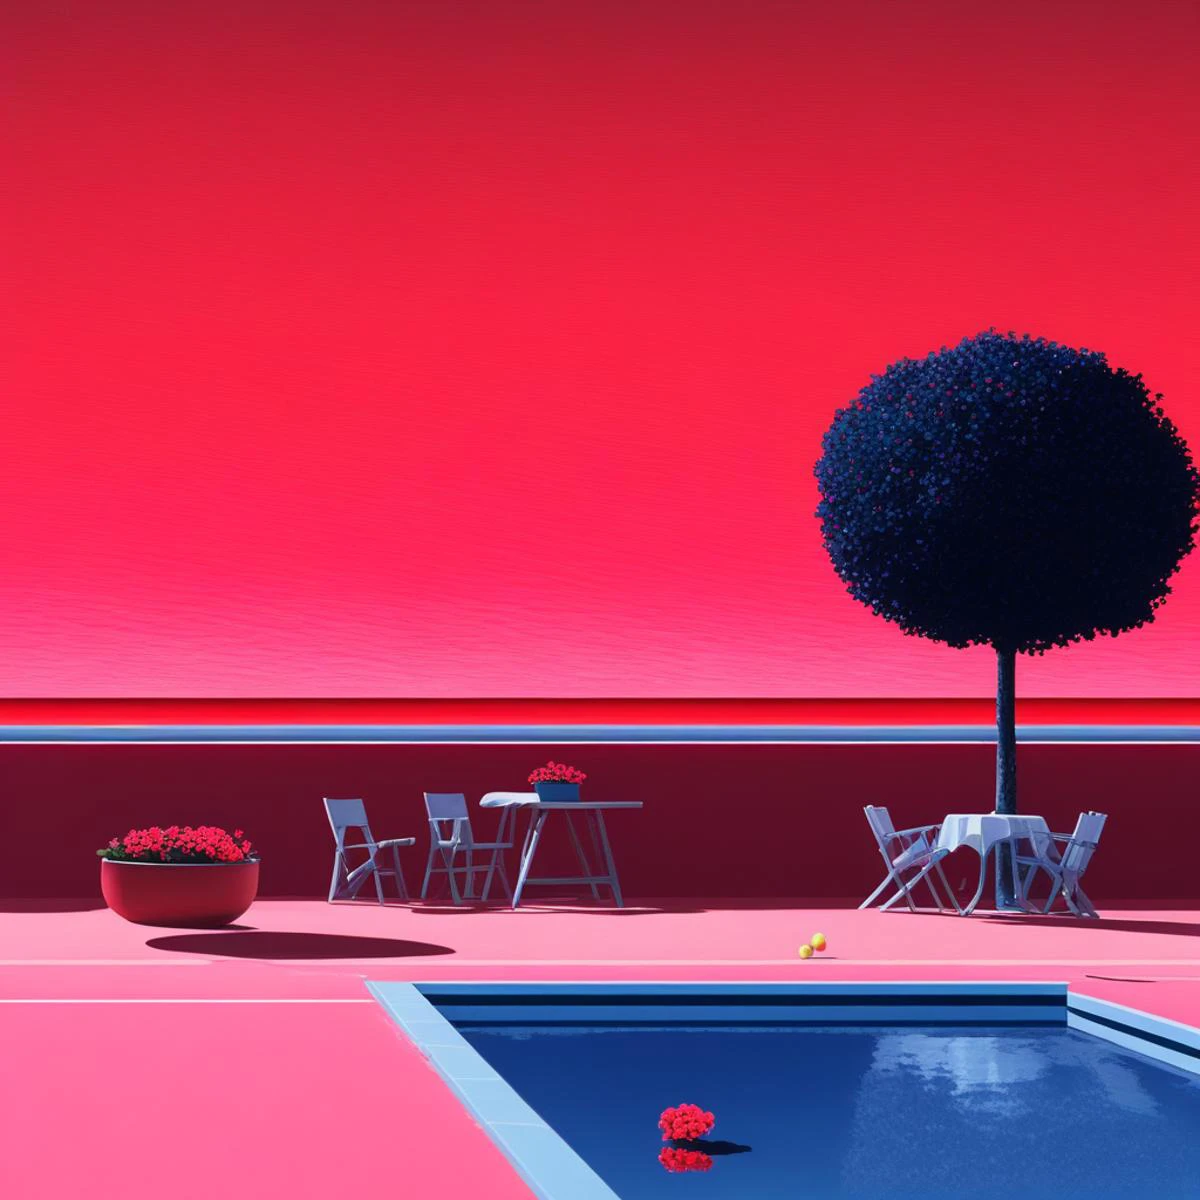 tree, still life, night, ocean, gradient sky, ground vehicle, window, Pool, flower, tennis, can, Sunny Reflection, sunny day, Night, red flower